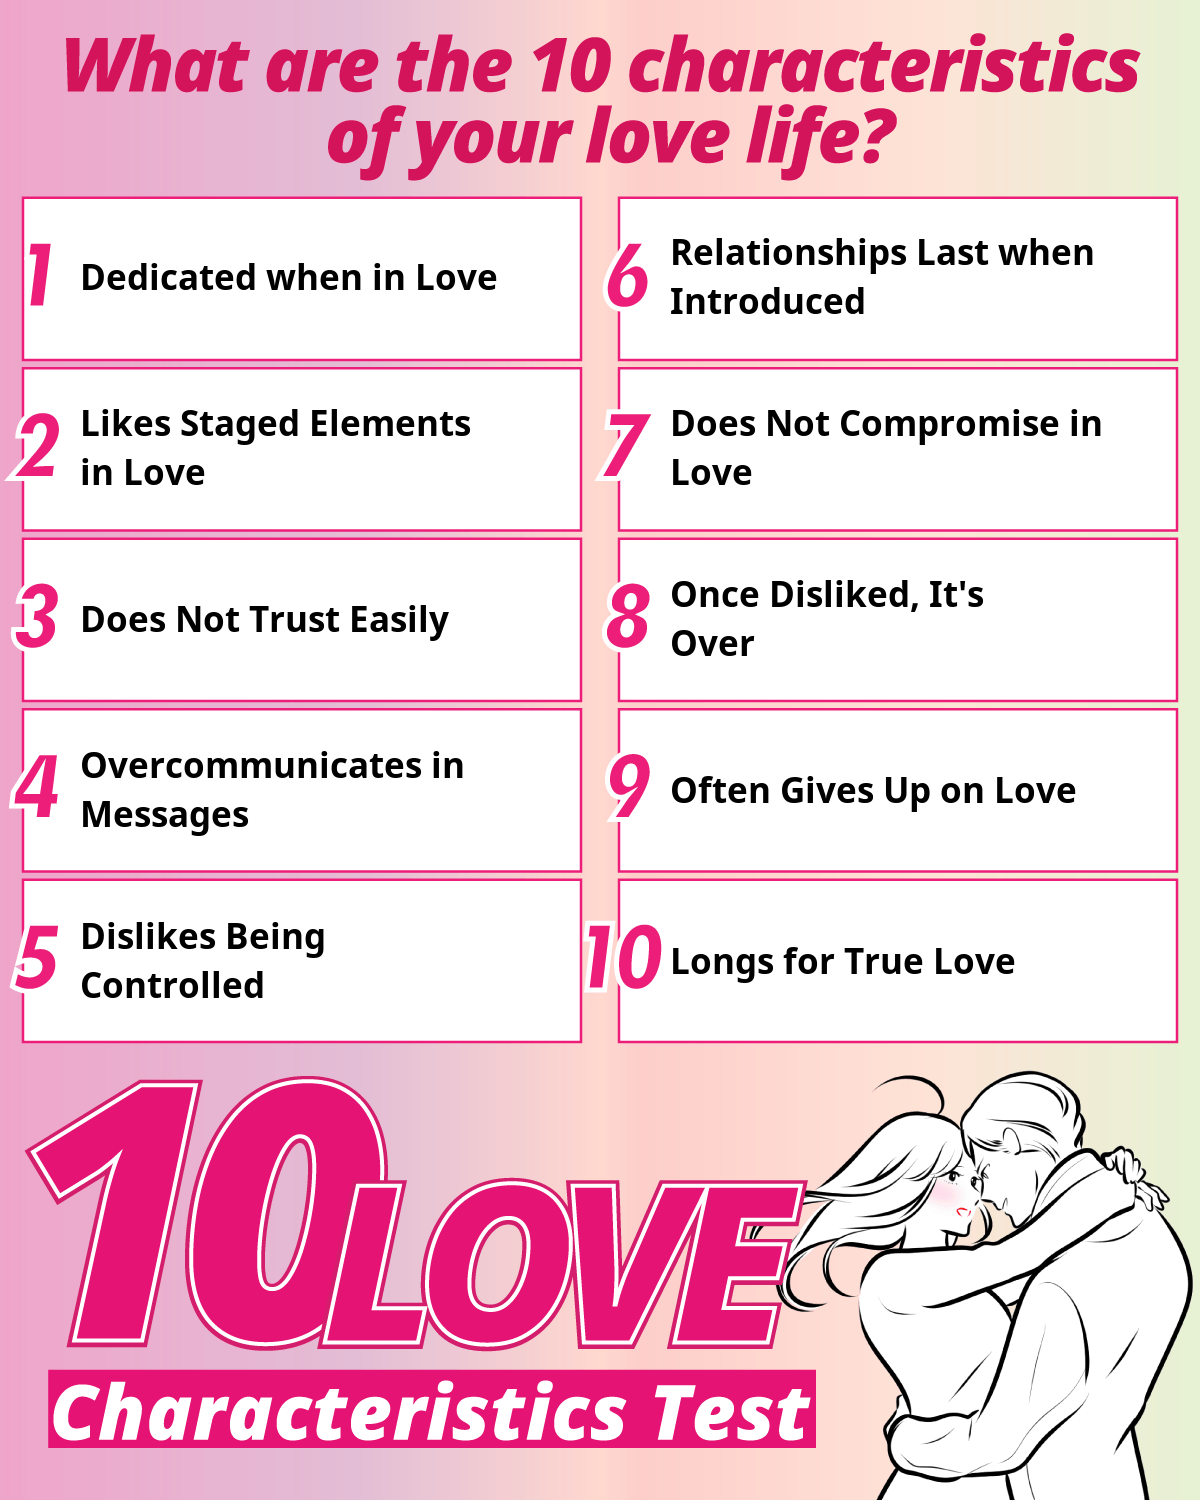 10 Love Characteristics Test | What are the 10 characteristics of your love life?